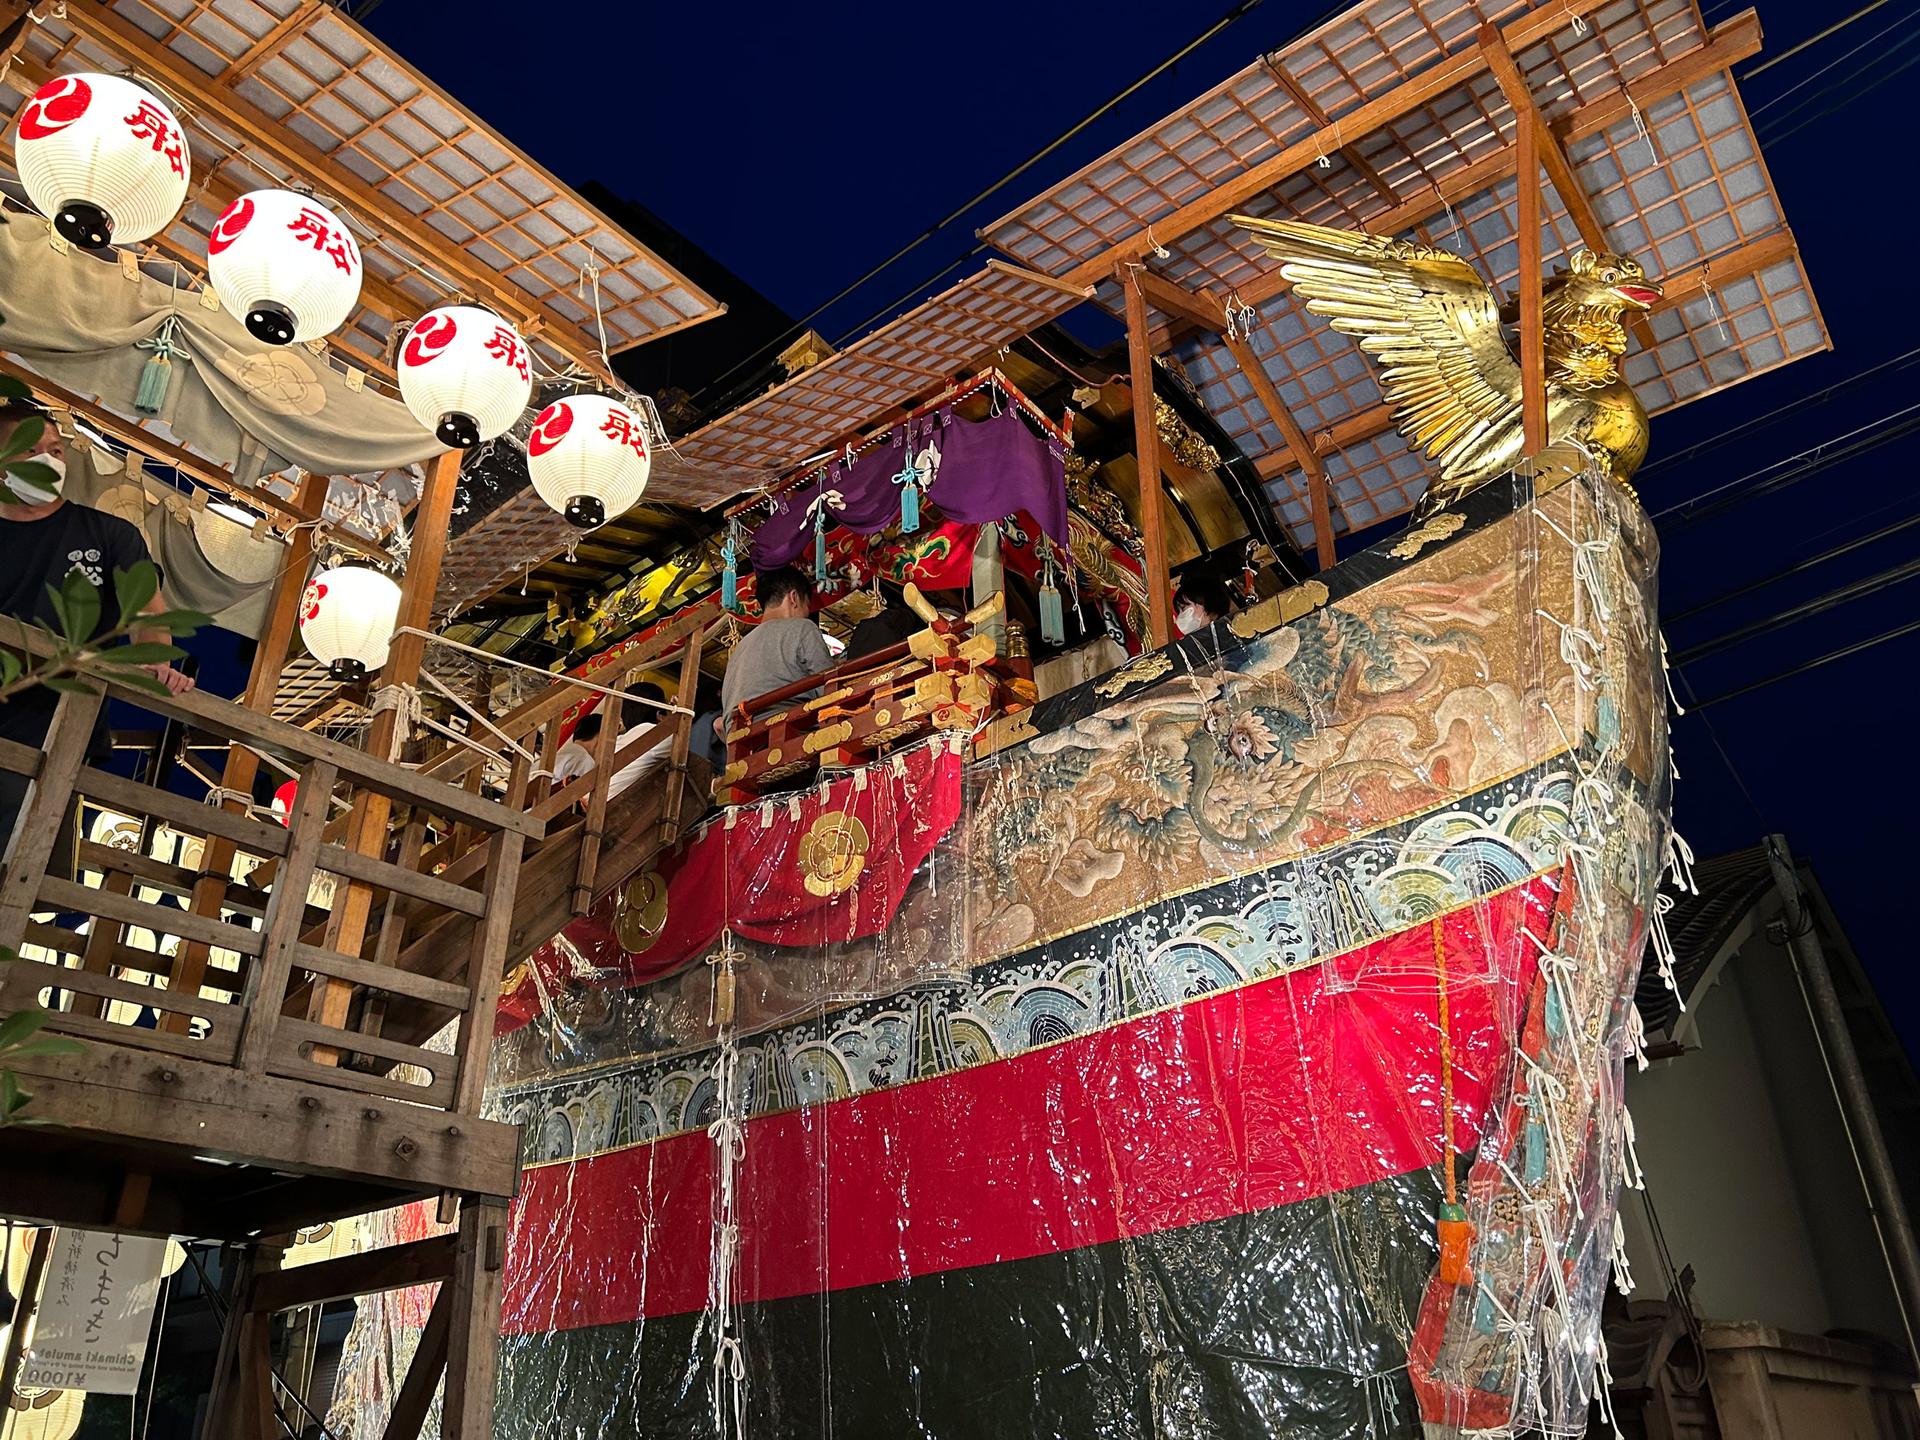 Yoiyama Festival attendees viewed a giant boat float called Fune Hoko, with a legendary story behind it. Attendees also listened to special Gion Bayashi music on all the main floats which was a symphony of gongs, bells, and drums. 